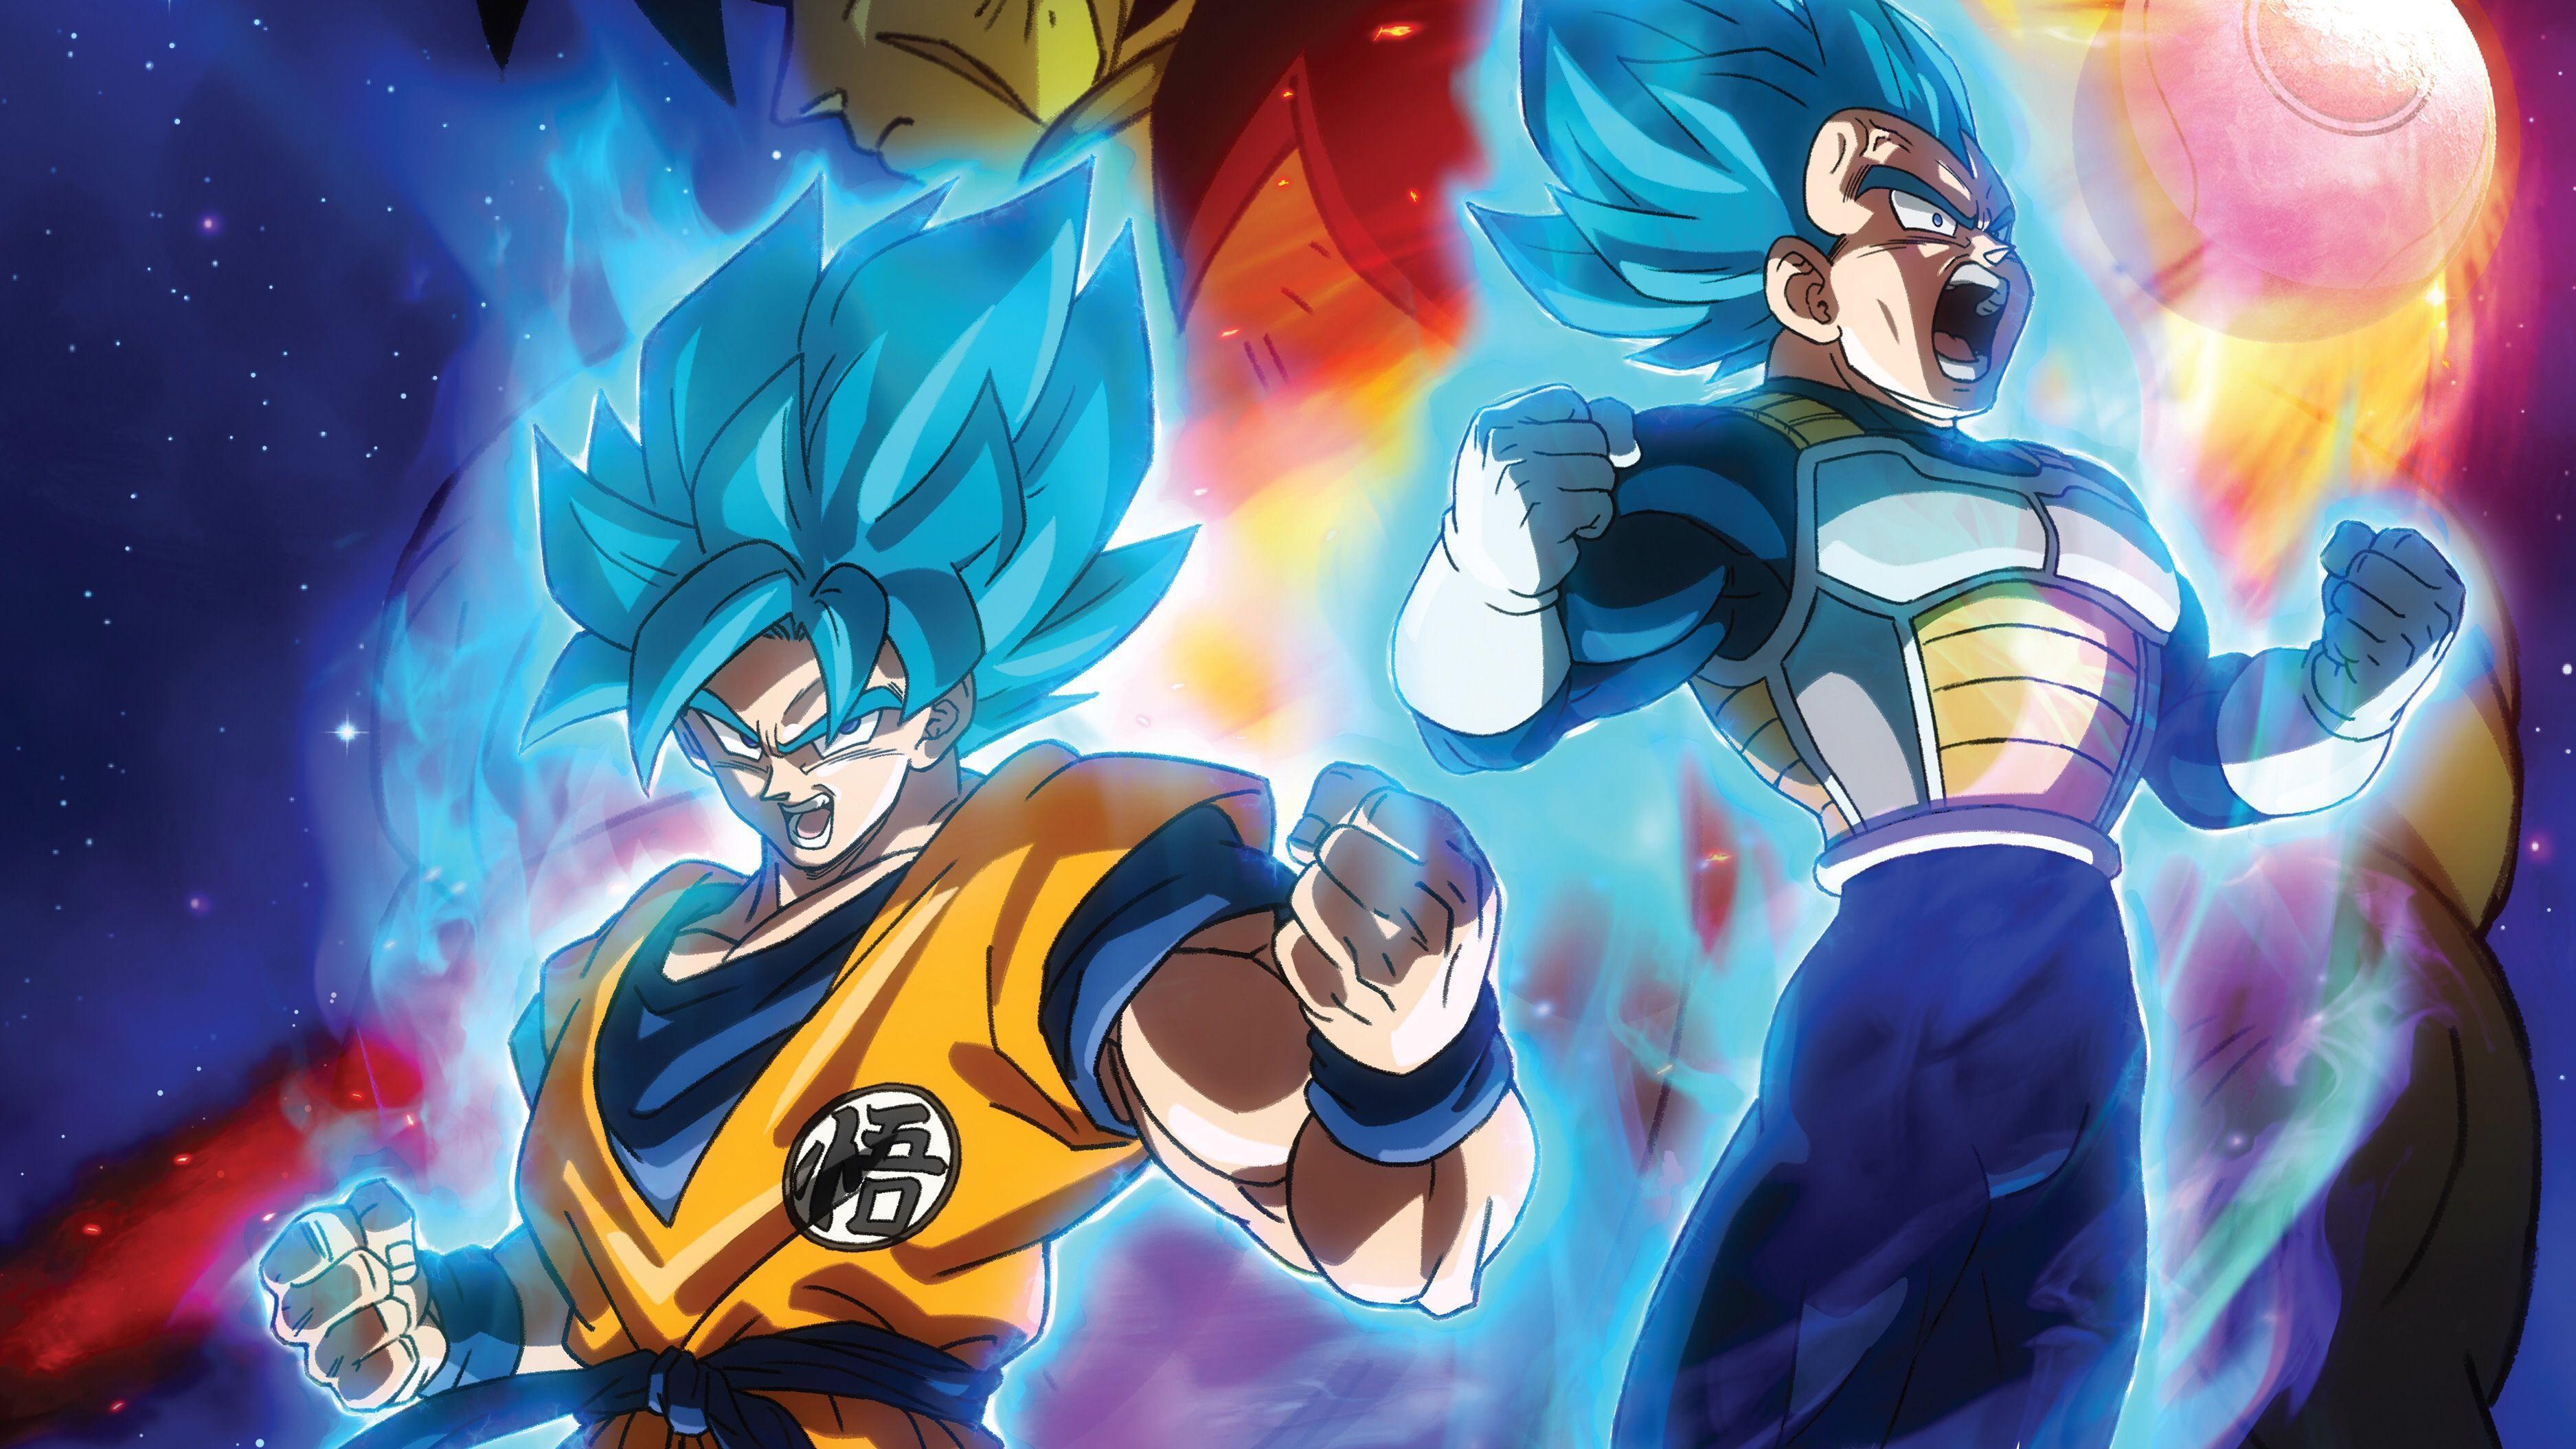 New 'Dragon Ball Super' movie slated for 2022 | GMA News Online